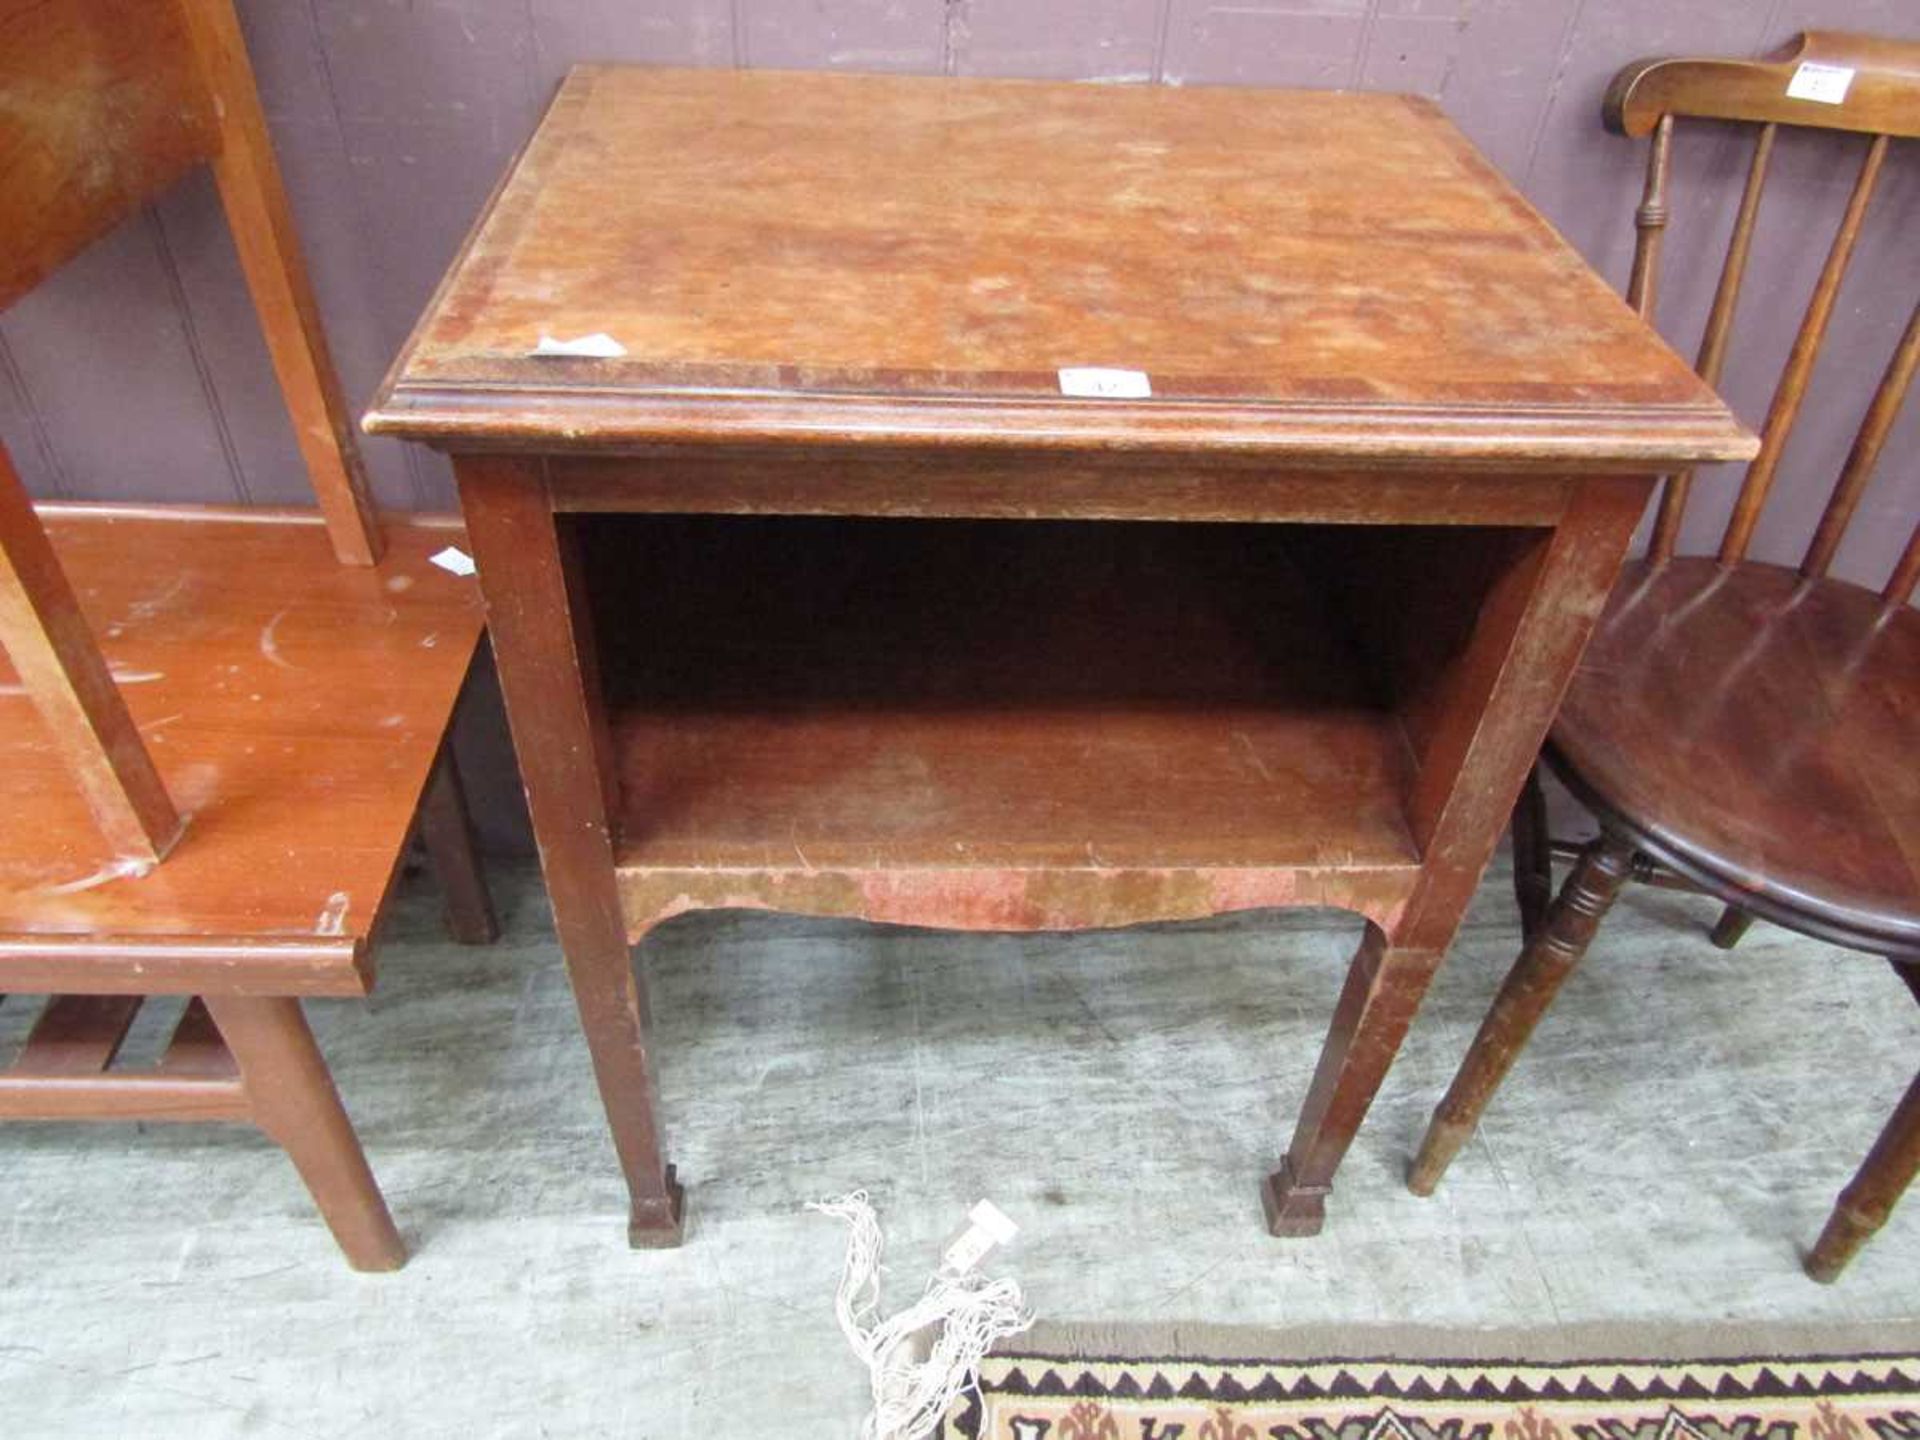 An early 20th century oak and walnut occasional table with open storage